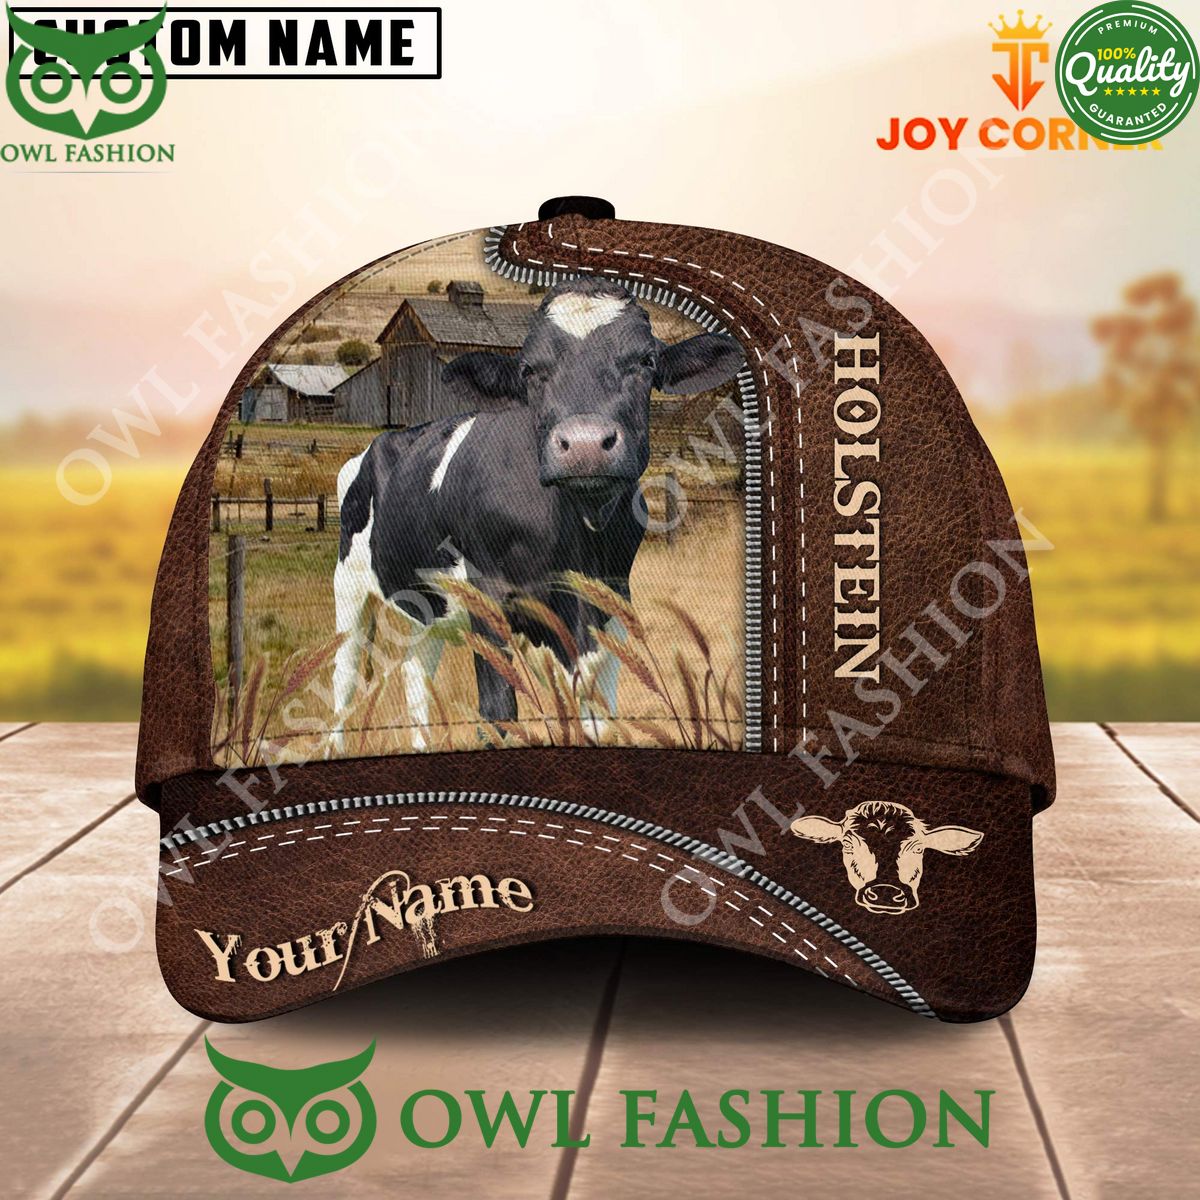 Customized Name Holstein Leather Cow Pattern Cap You look beautiful forever